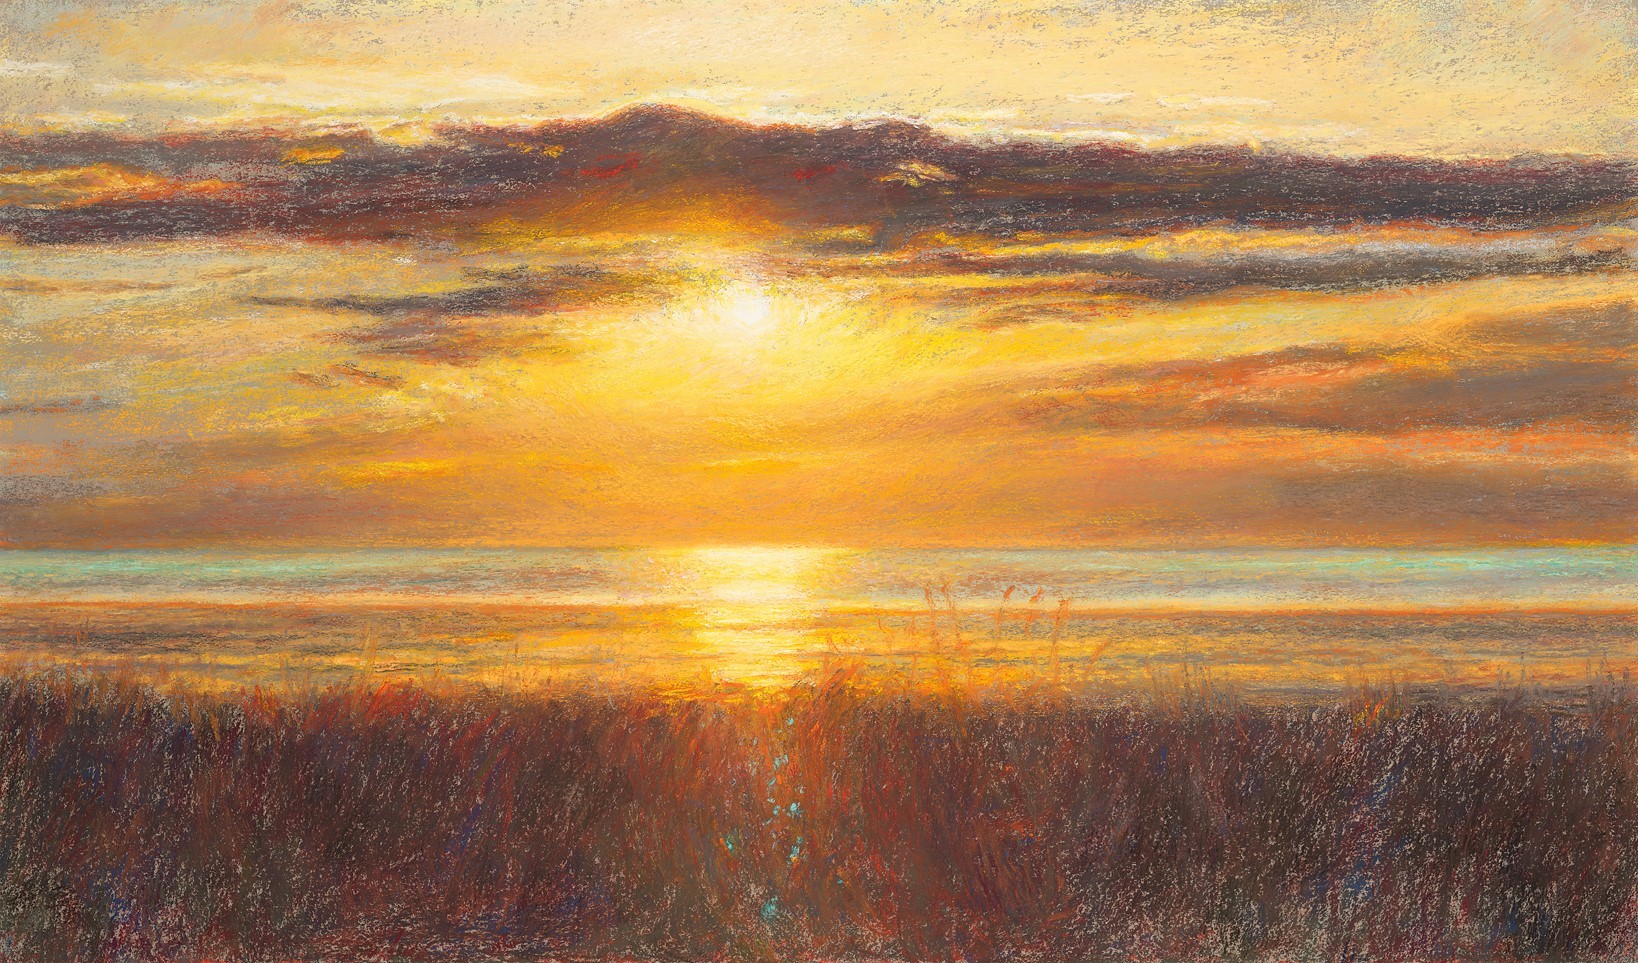 Contemporary art. Title: October Light, Original Pastel, 15x26 in by Canadian artist Paul Chizik.